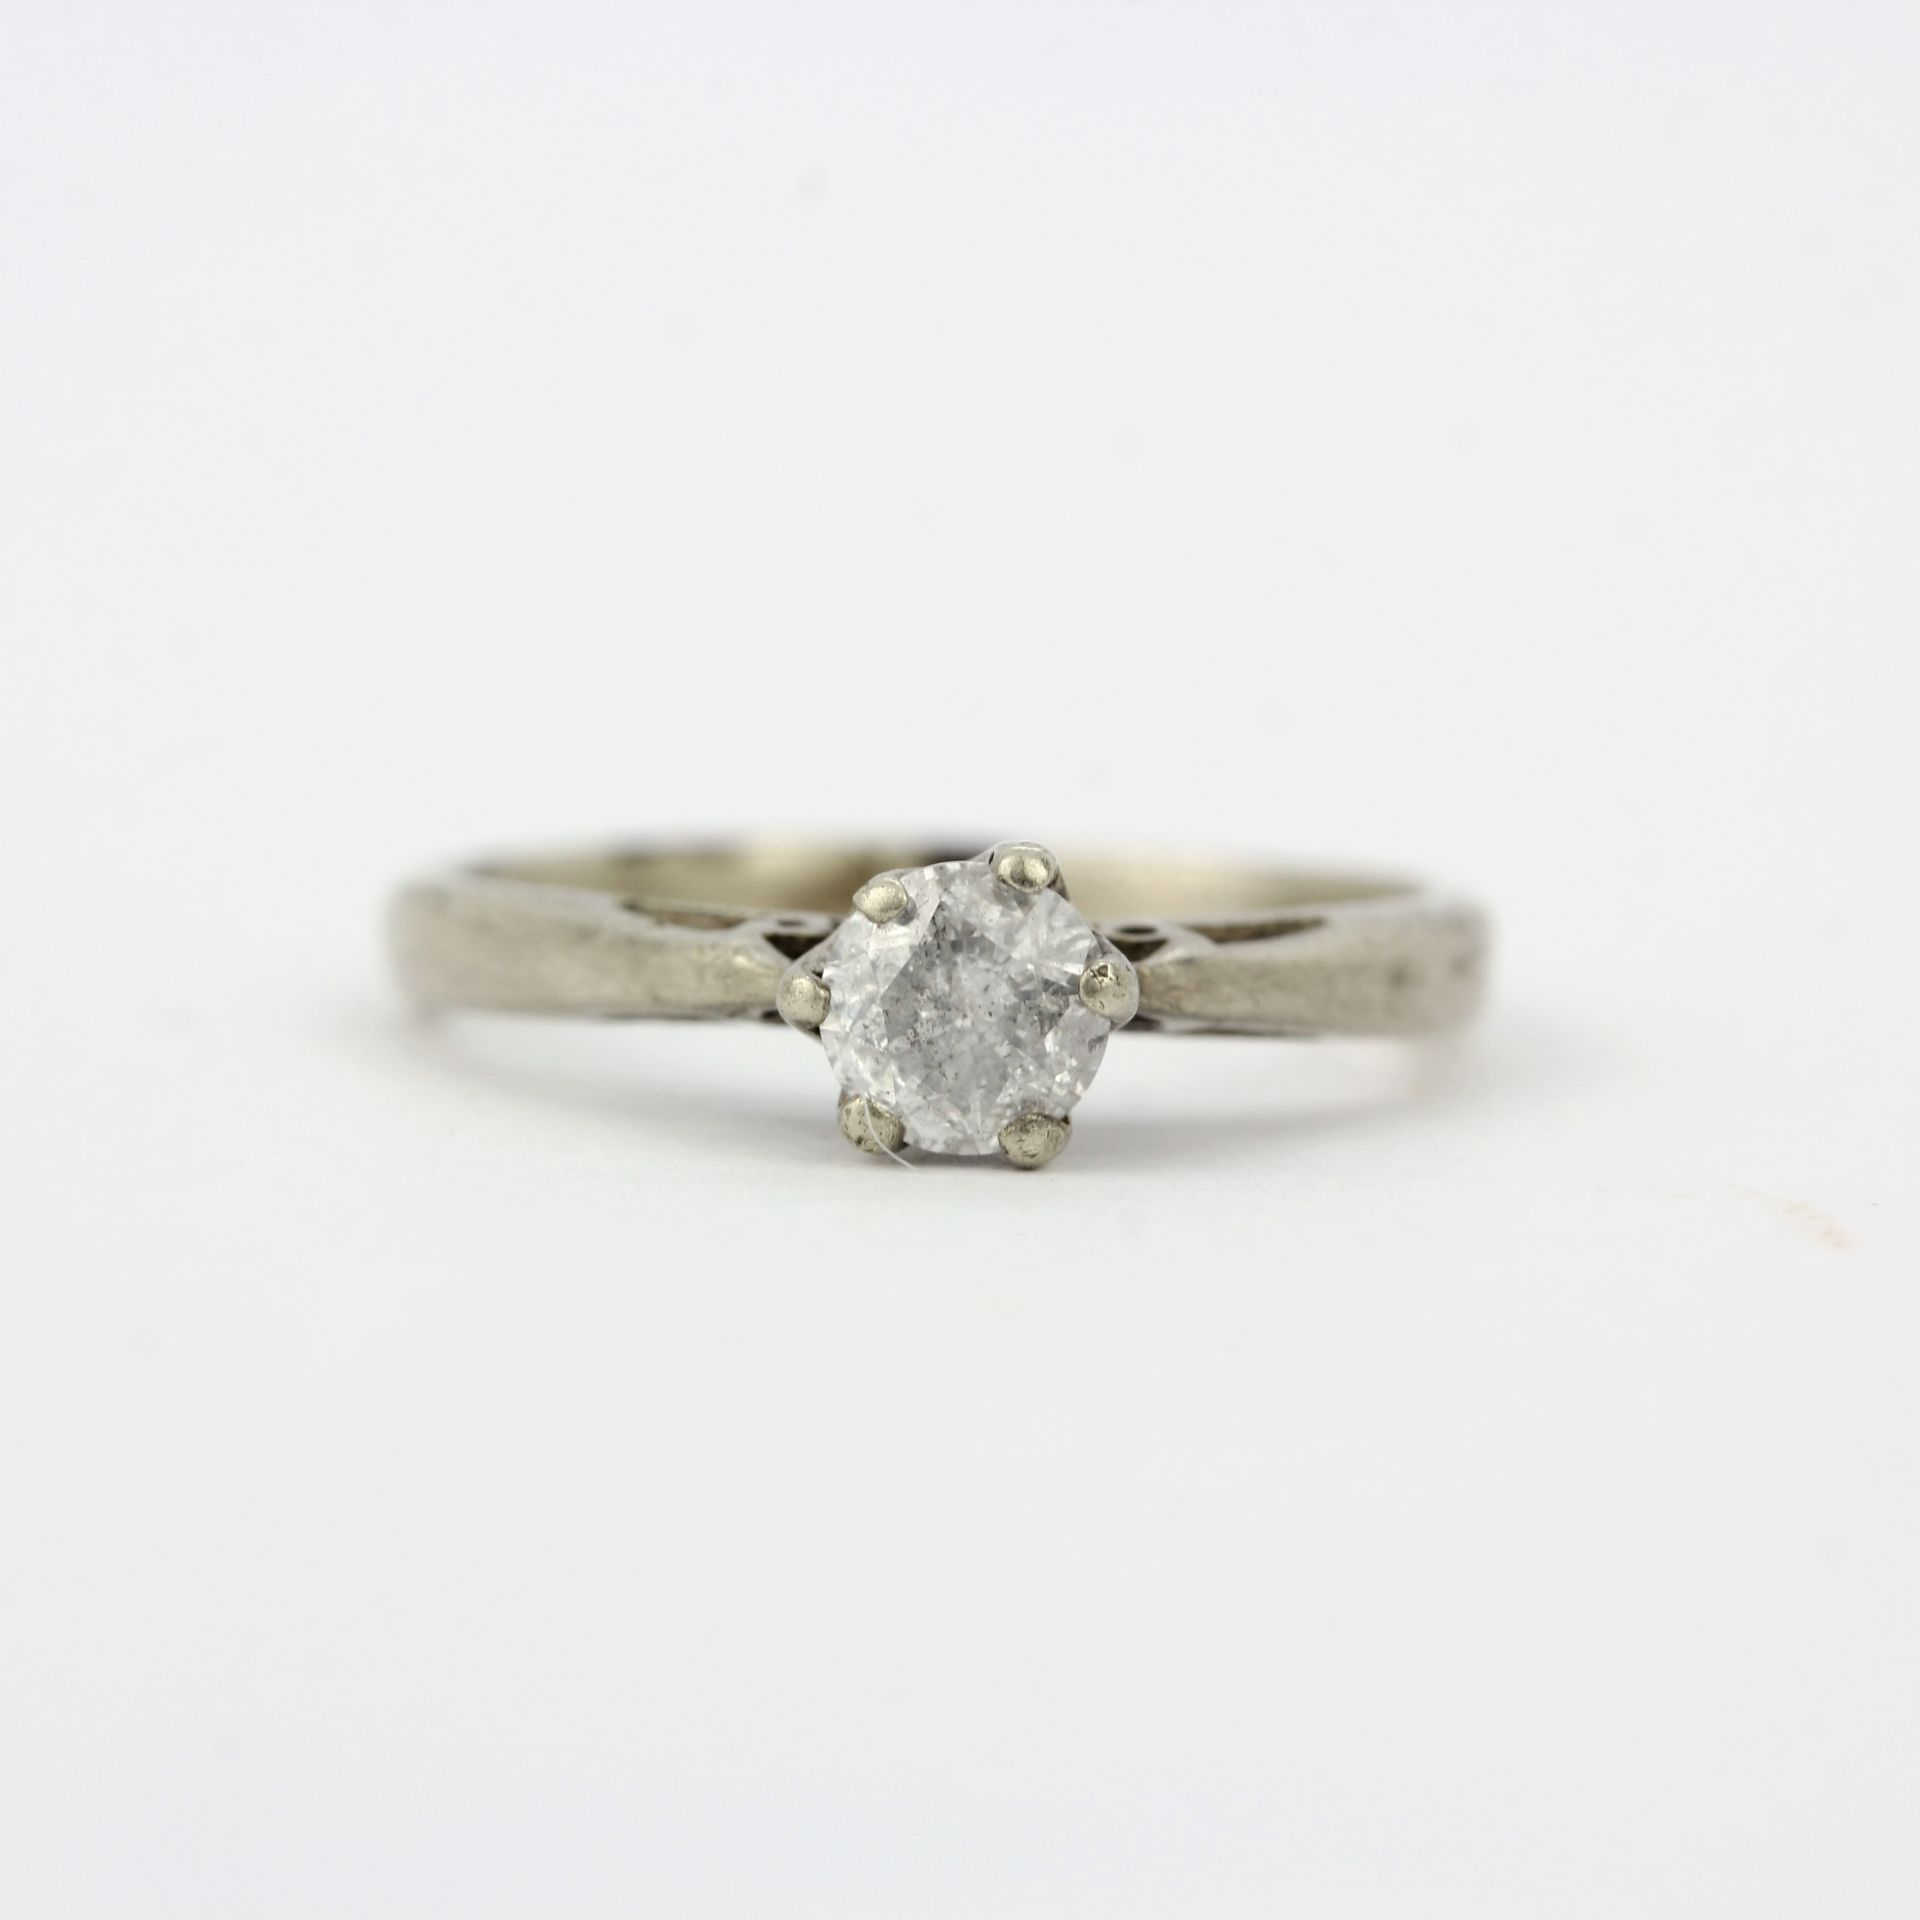 A 9ct white gold solitaire ring set with a brilliant cut diamond, 0.25ct, ring size I. - Image 2 of 3